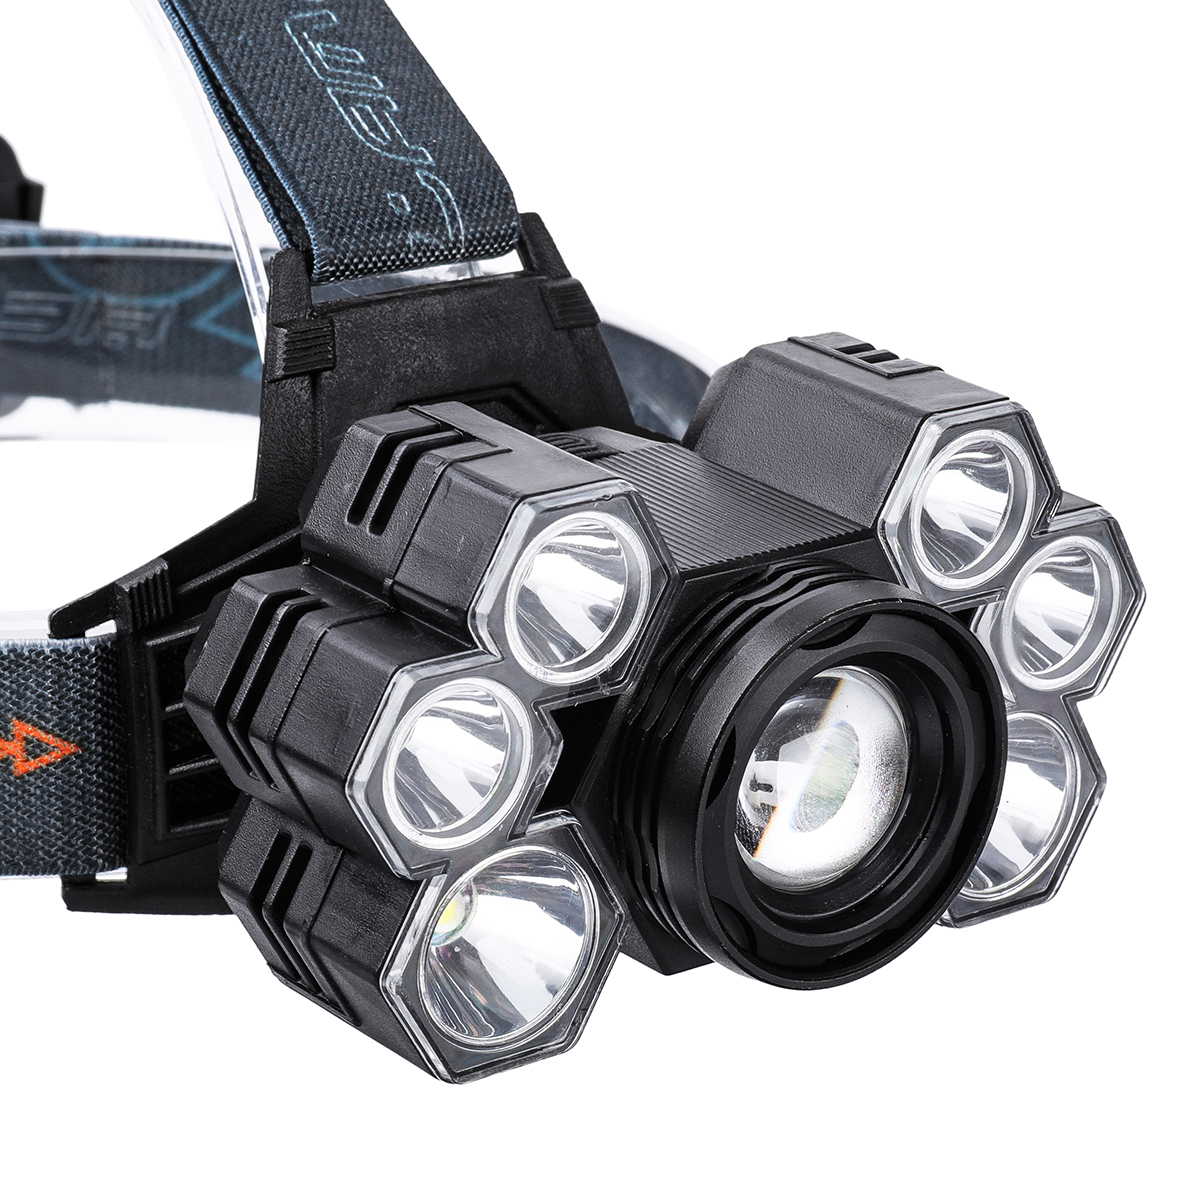 Find Mechanical Zoom Seven Headlights with a pair of 18650 Battery USB Lines for Sale on Gipsybee.com with cryptocurrencies